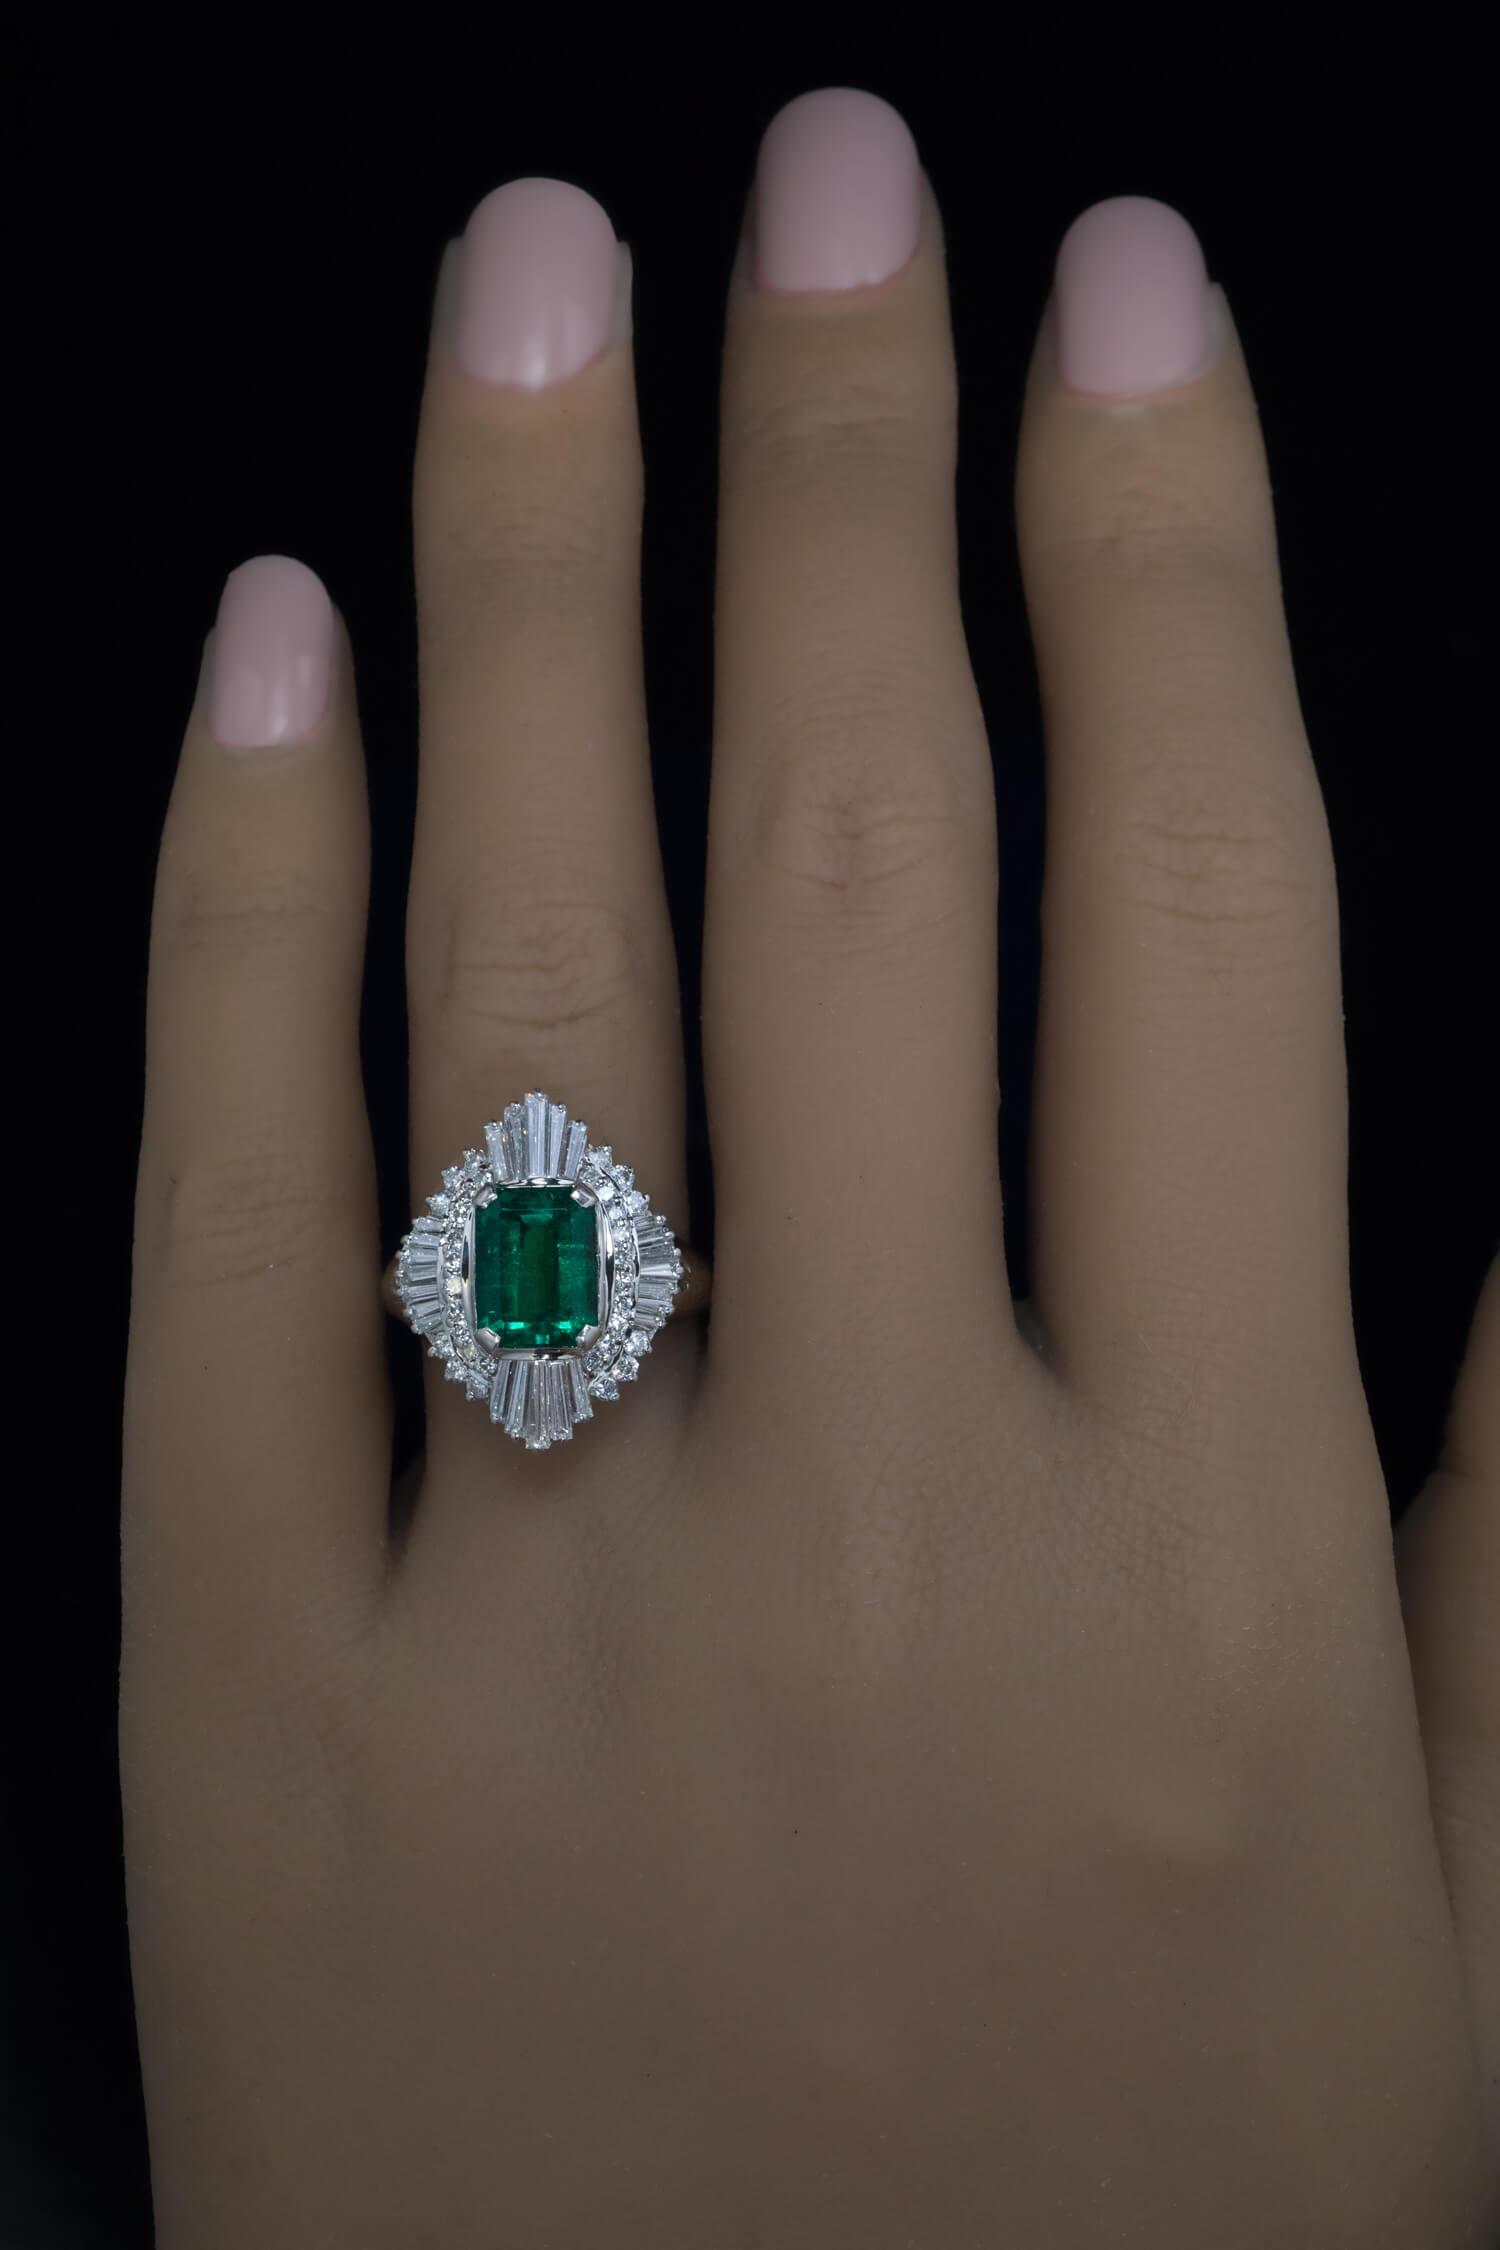 Vintage 2 Ct Colombian Emerald Diamond Engagement Ring Ref: 782560 ...